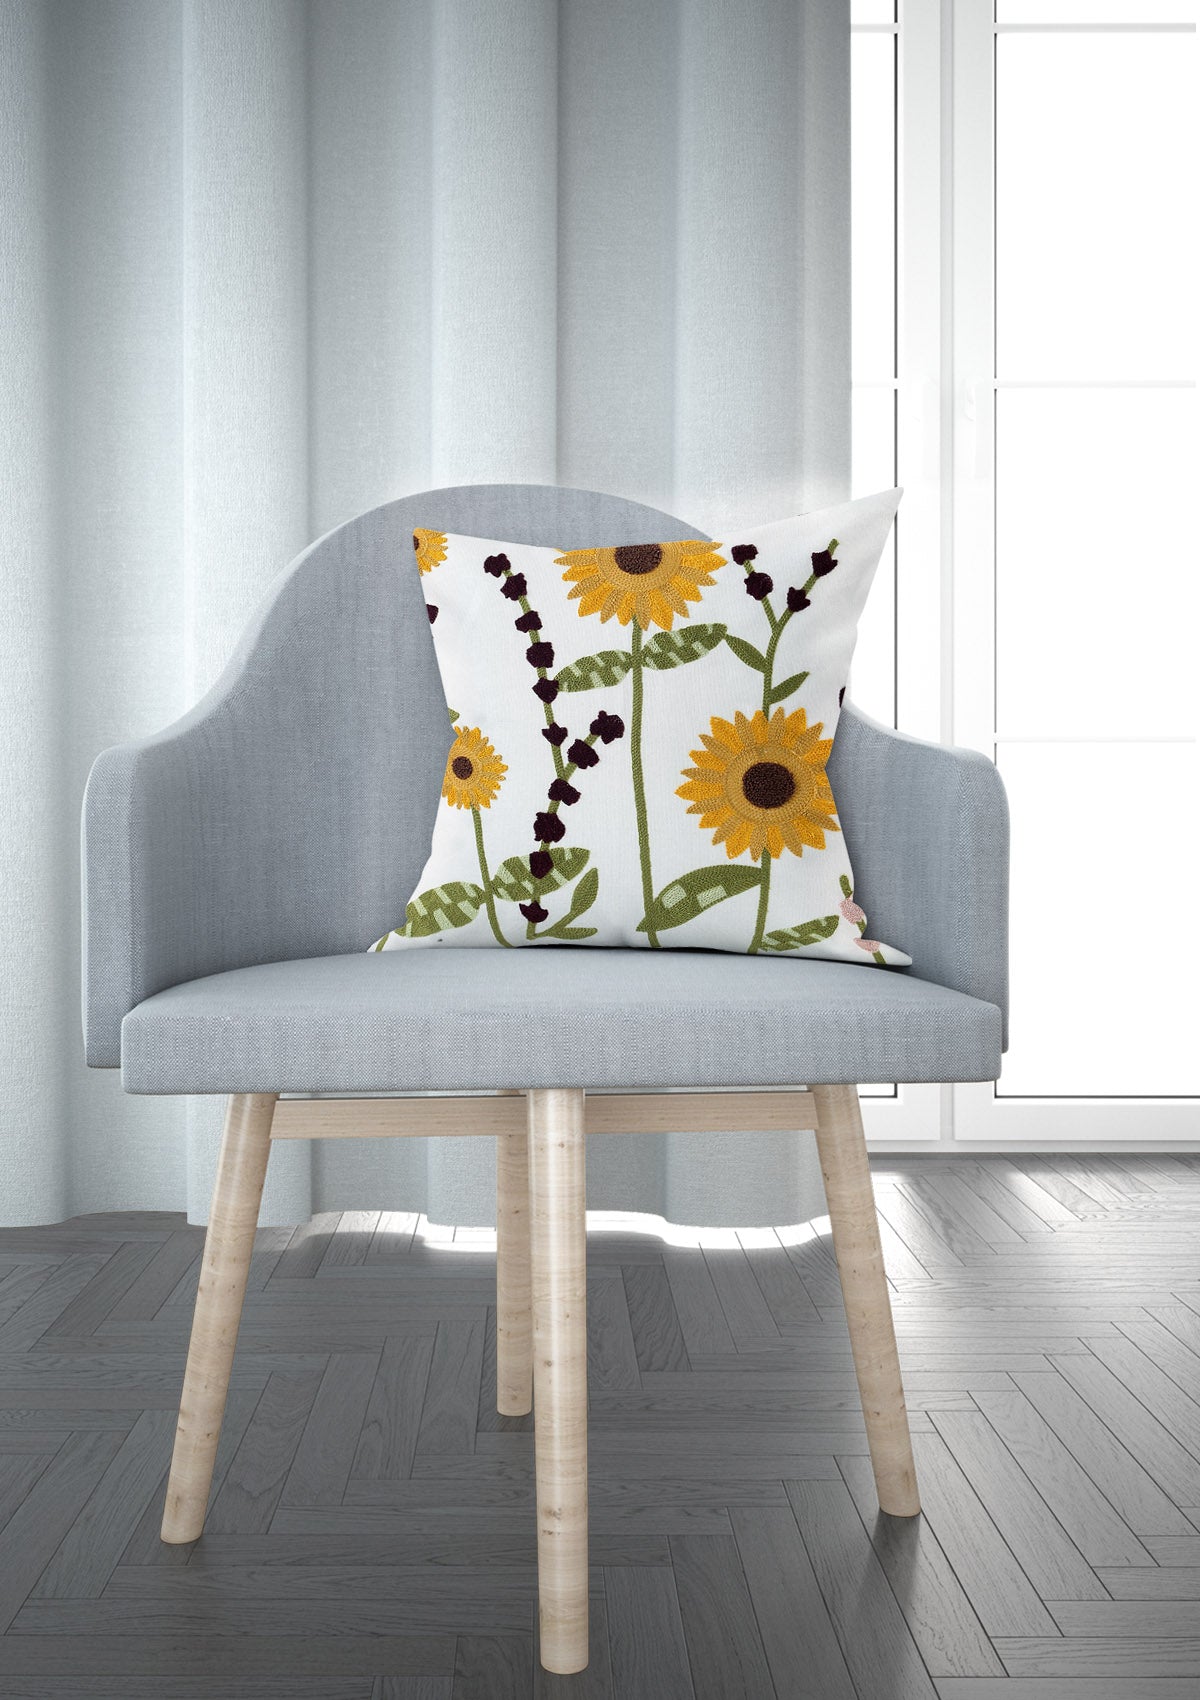 Vibrant sunflower cushion cover with intricate yellow petals and a touch of green foliage